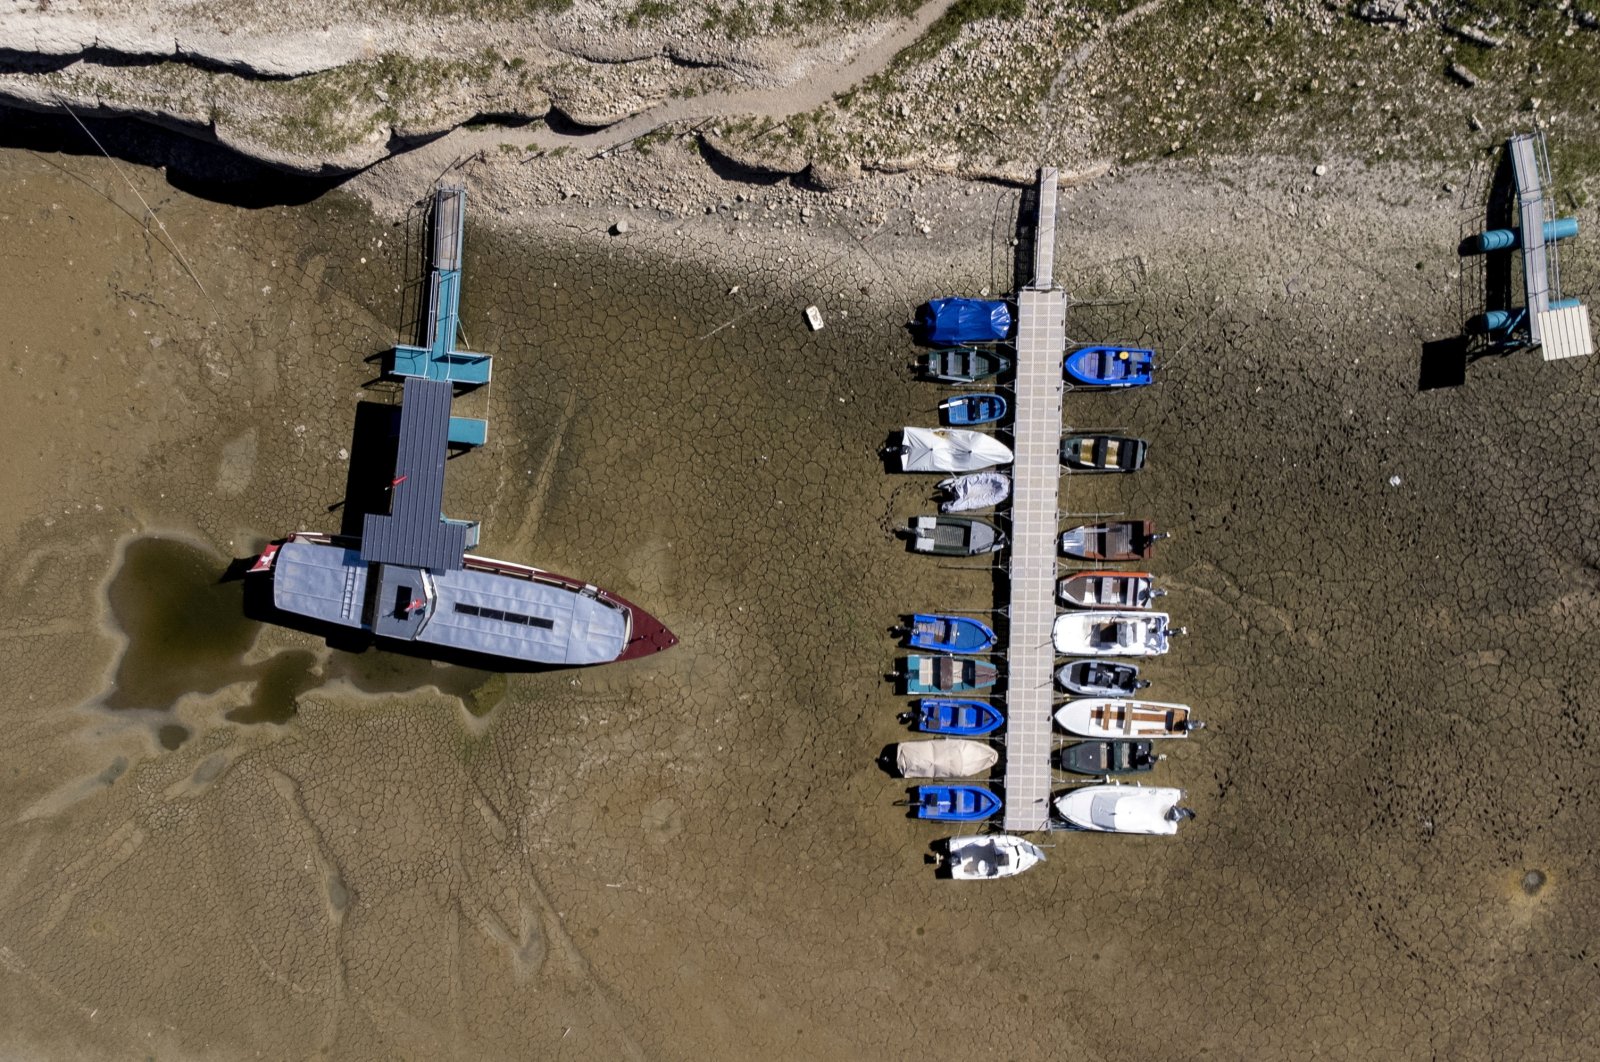 Boats are seen on the dried bed of the drought-affected Doubs River on the border with France in Les Brenets, Switzerland, Aug. 8, 2022. (Reuters Photo)